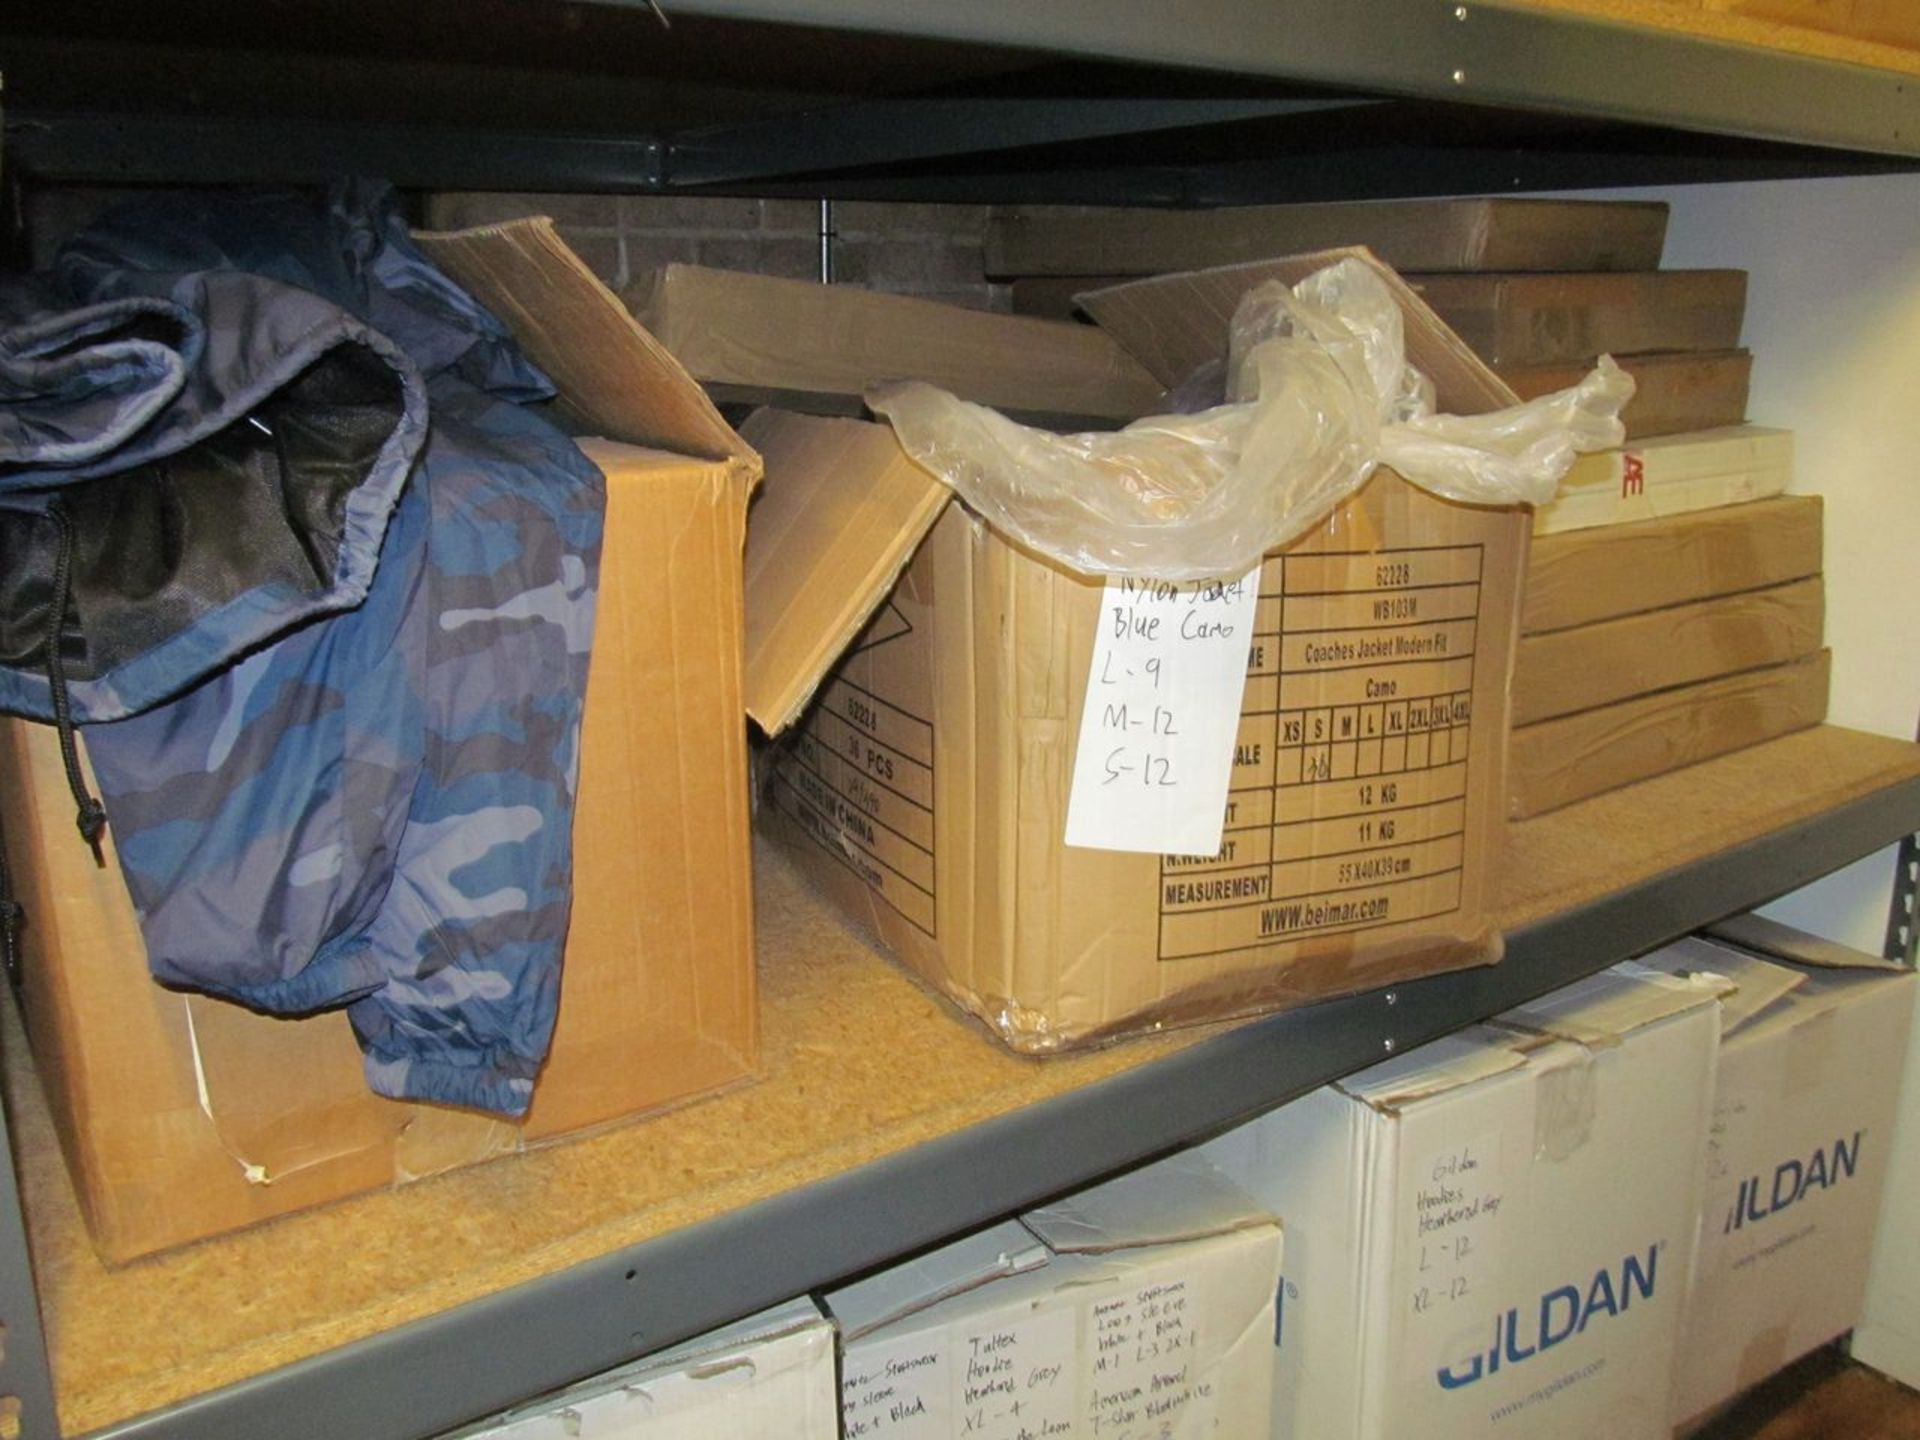 Lot - Contents of Shelf, to Include: (4) Boxes Un-Printed Nylon Jackets (Camo, Blue Camo, Black), ( - Image 2 of 3